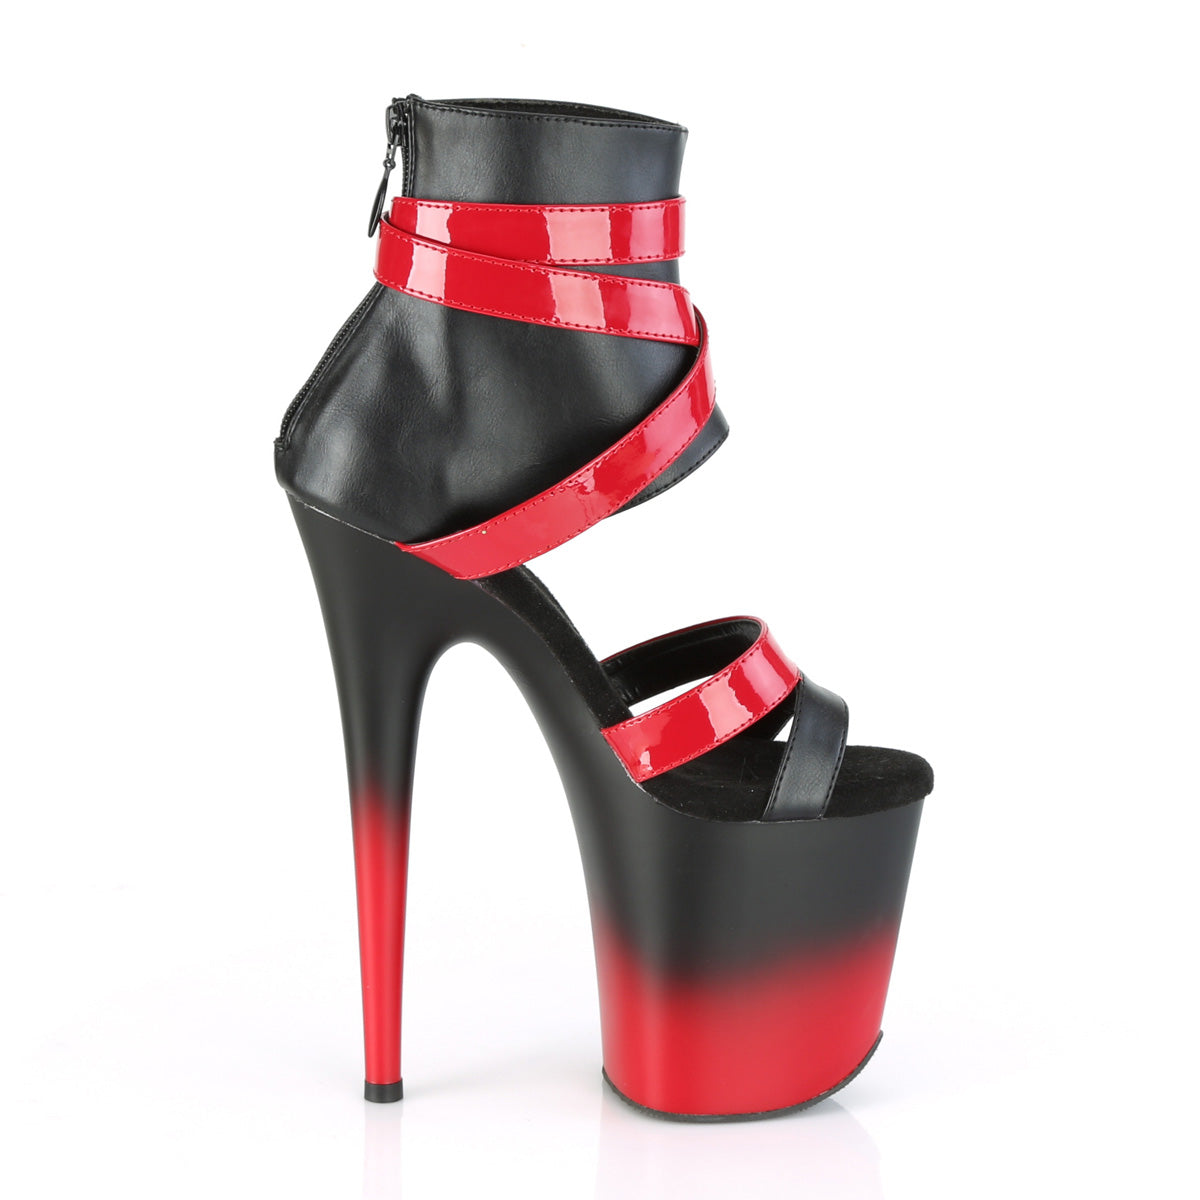 8 Inch Heel FLAMINGO-800-15 Black Faux Leather-Red Pat